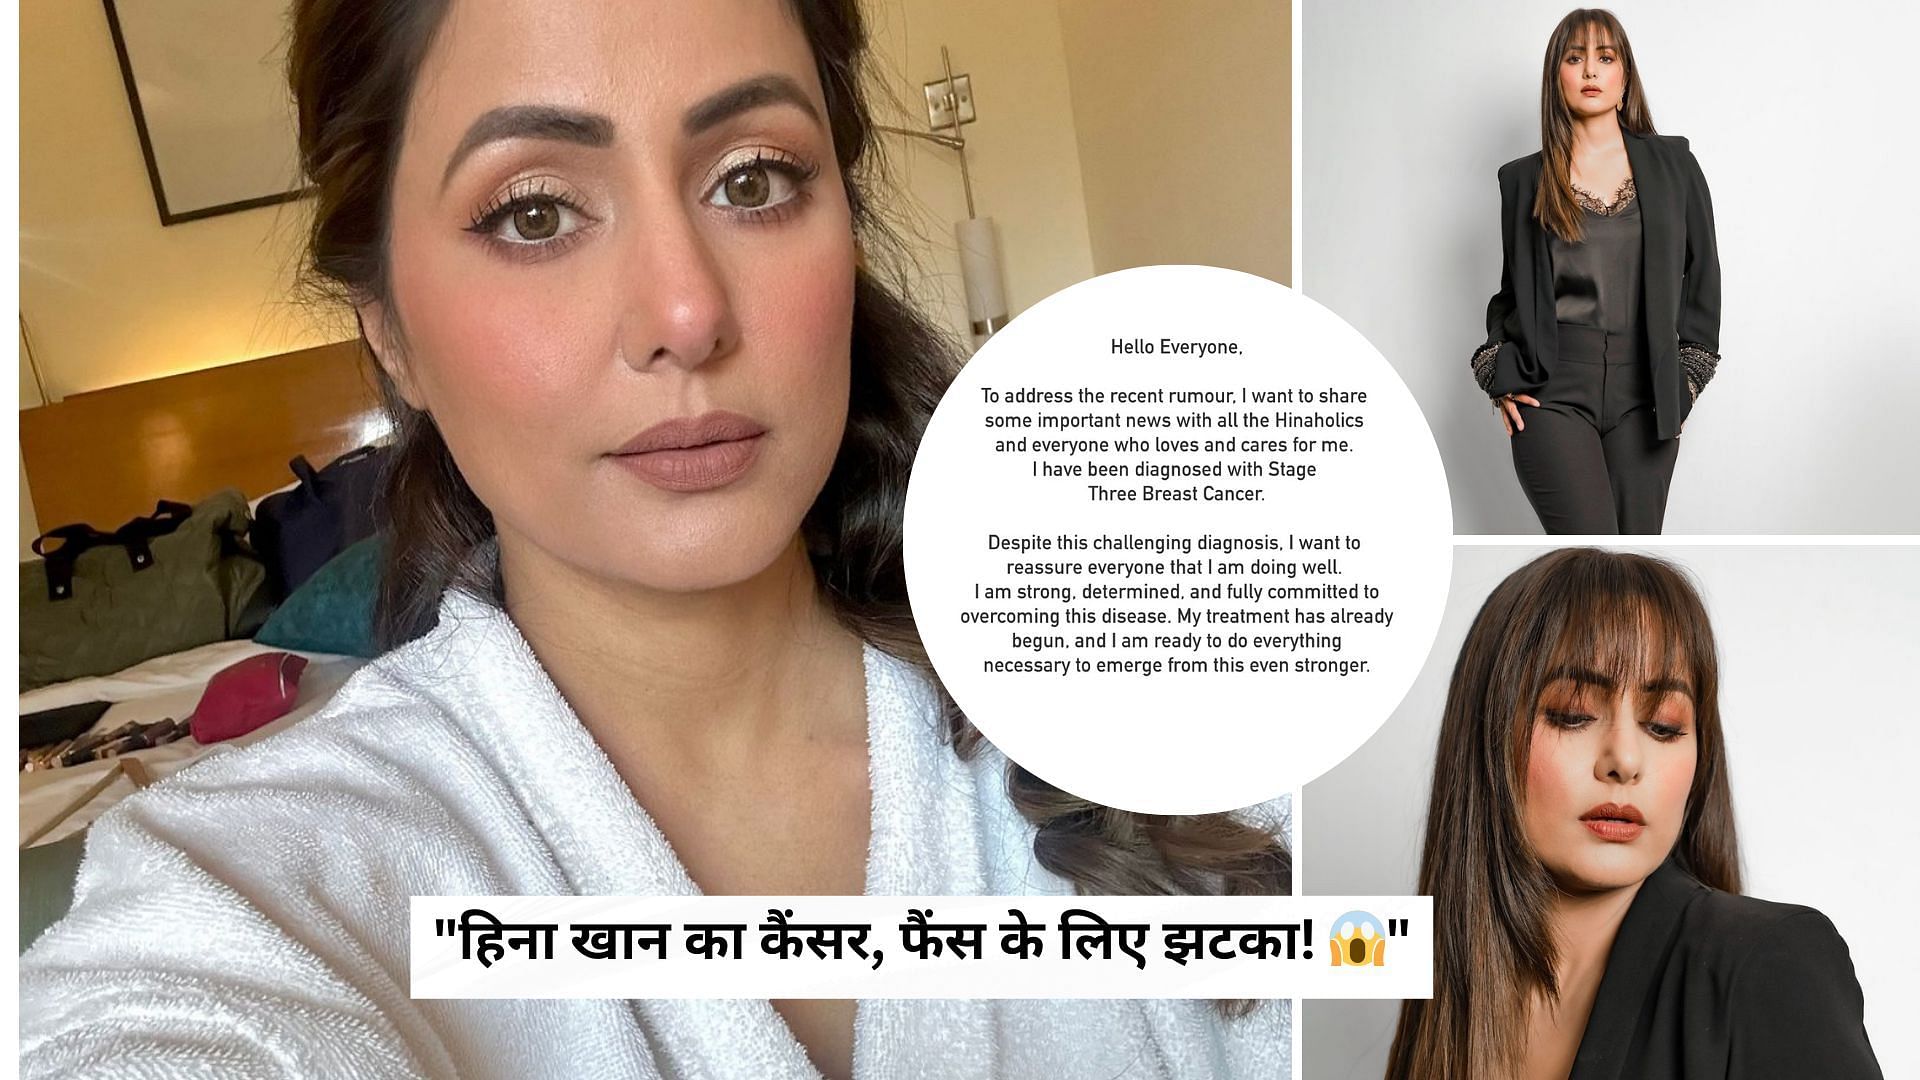 Hina Khan suffers from stage 3 breast cancer